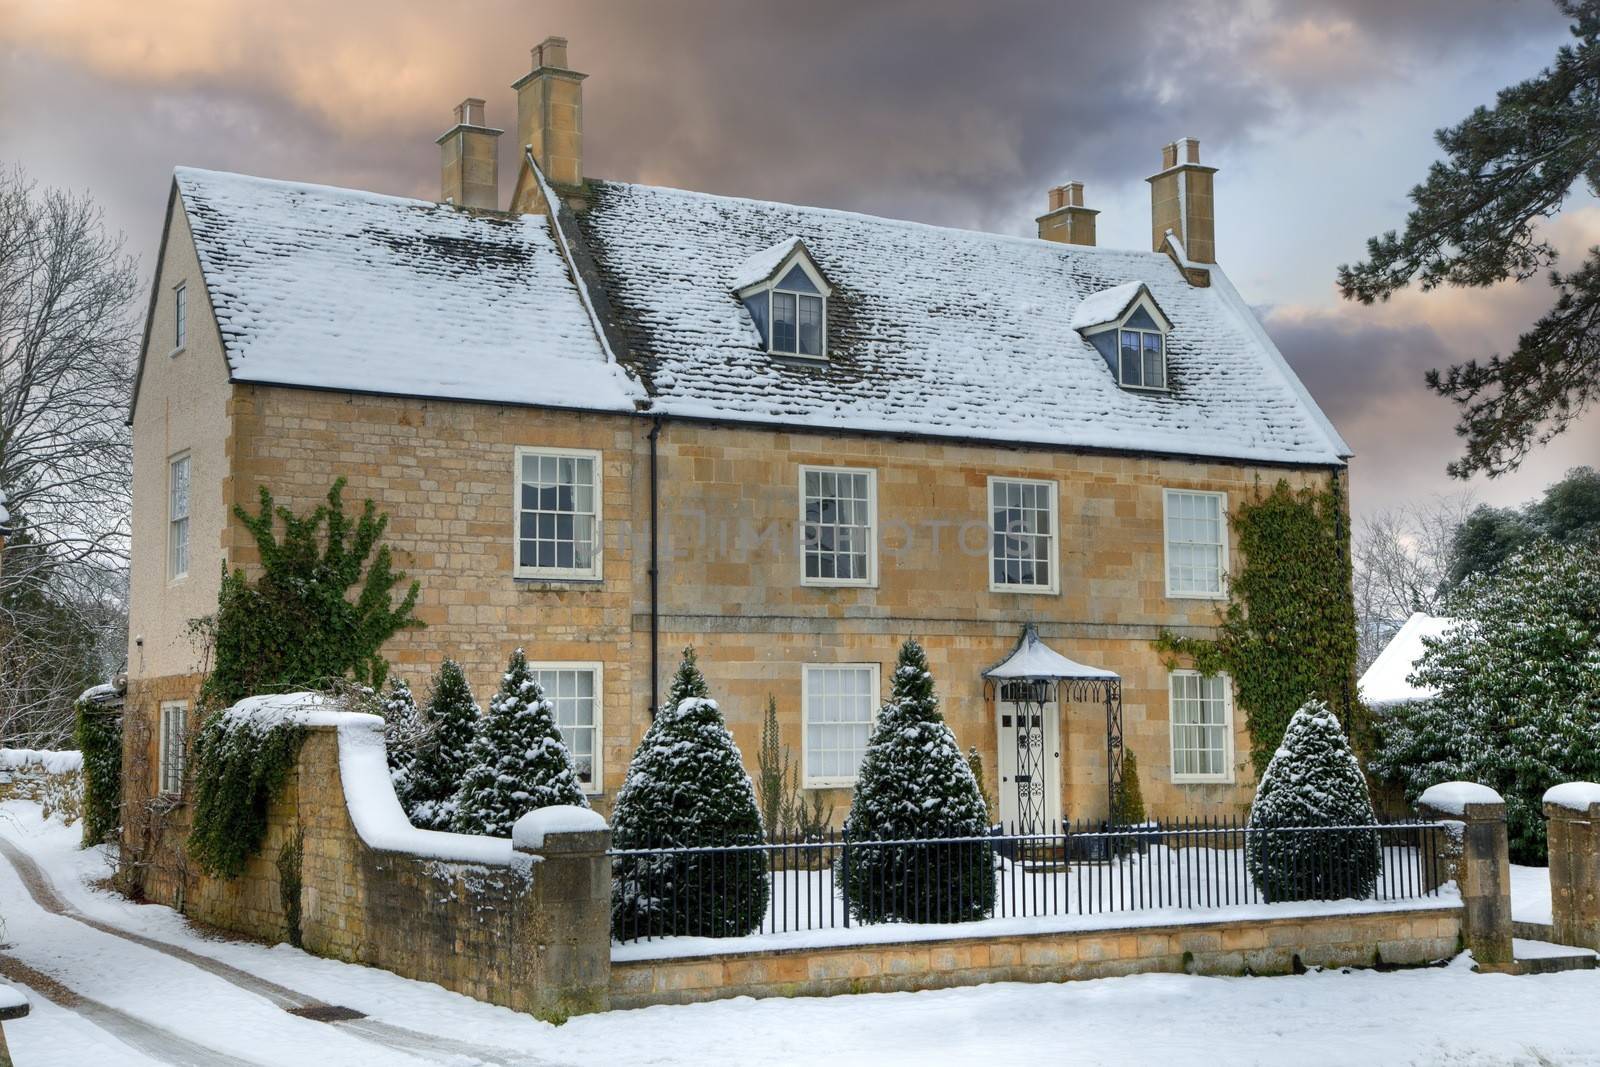 Detached Cotswold house with snow, Broadway, Worcestershire, England.